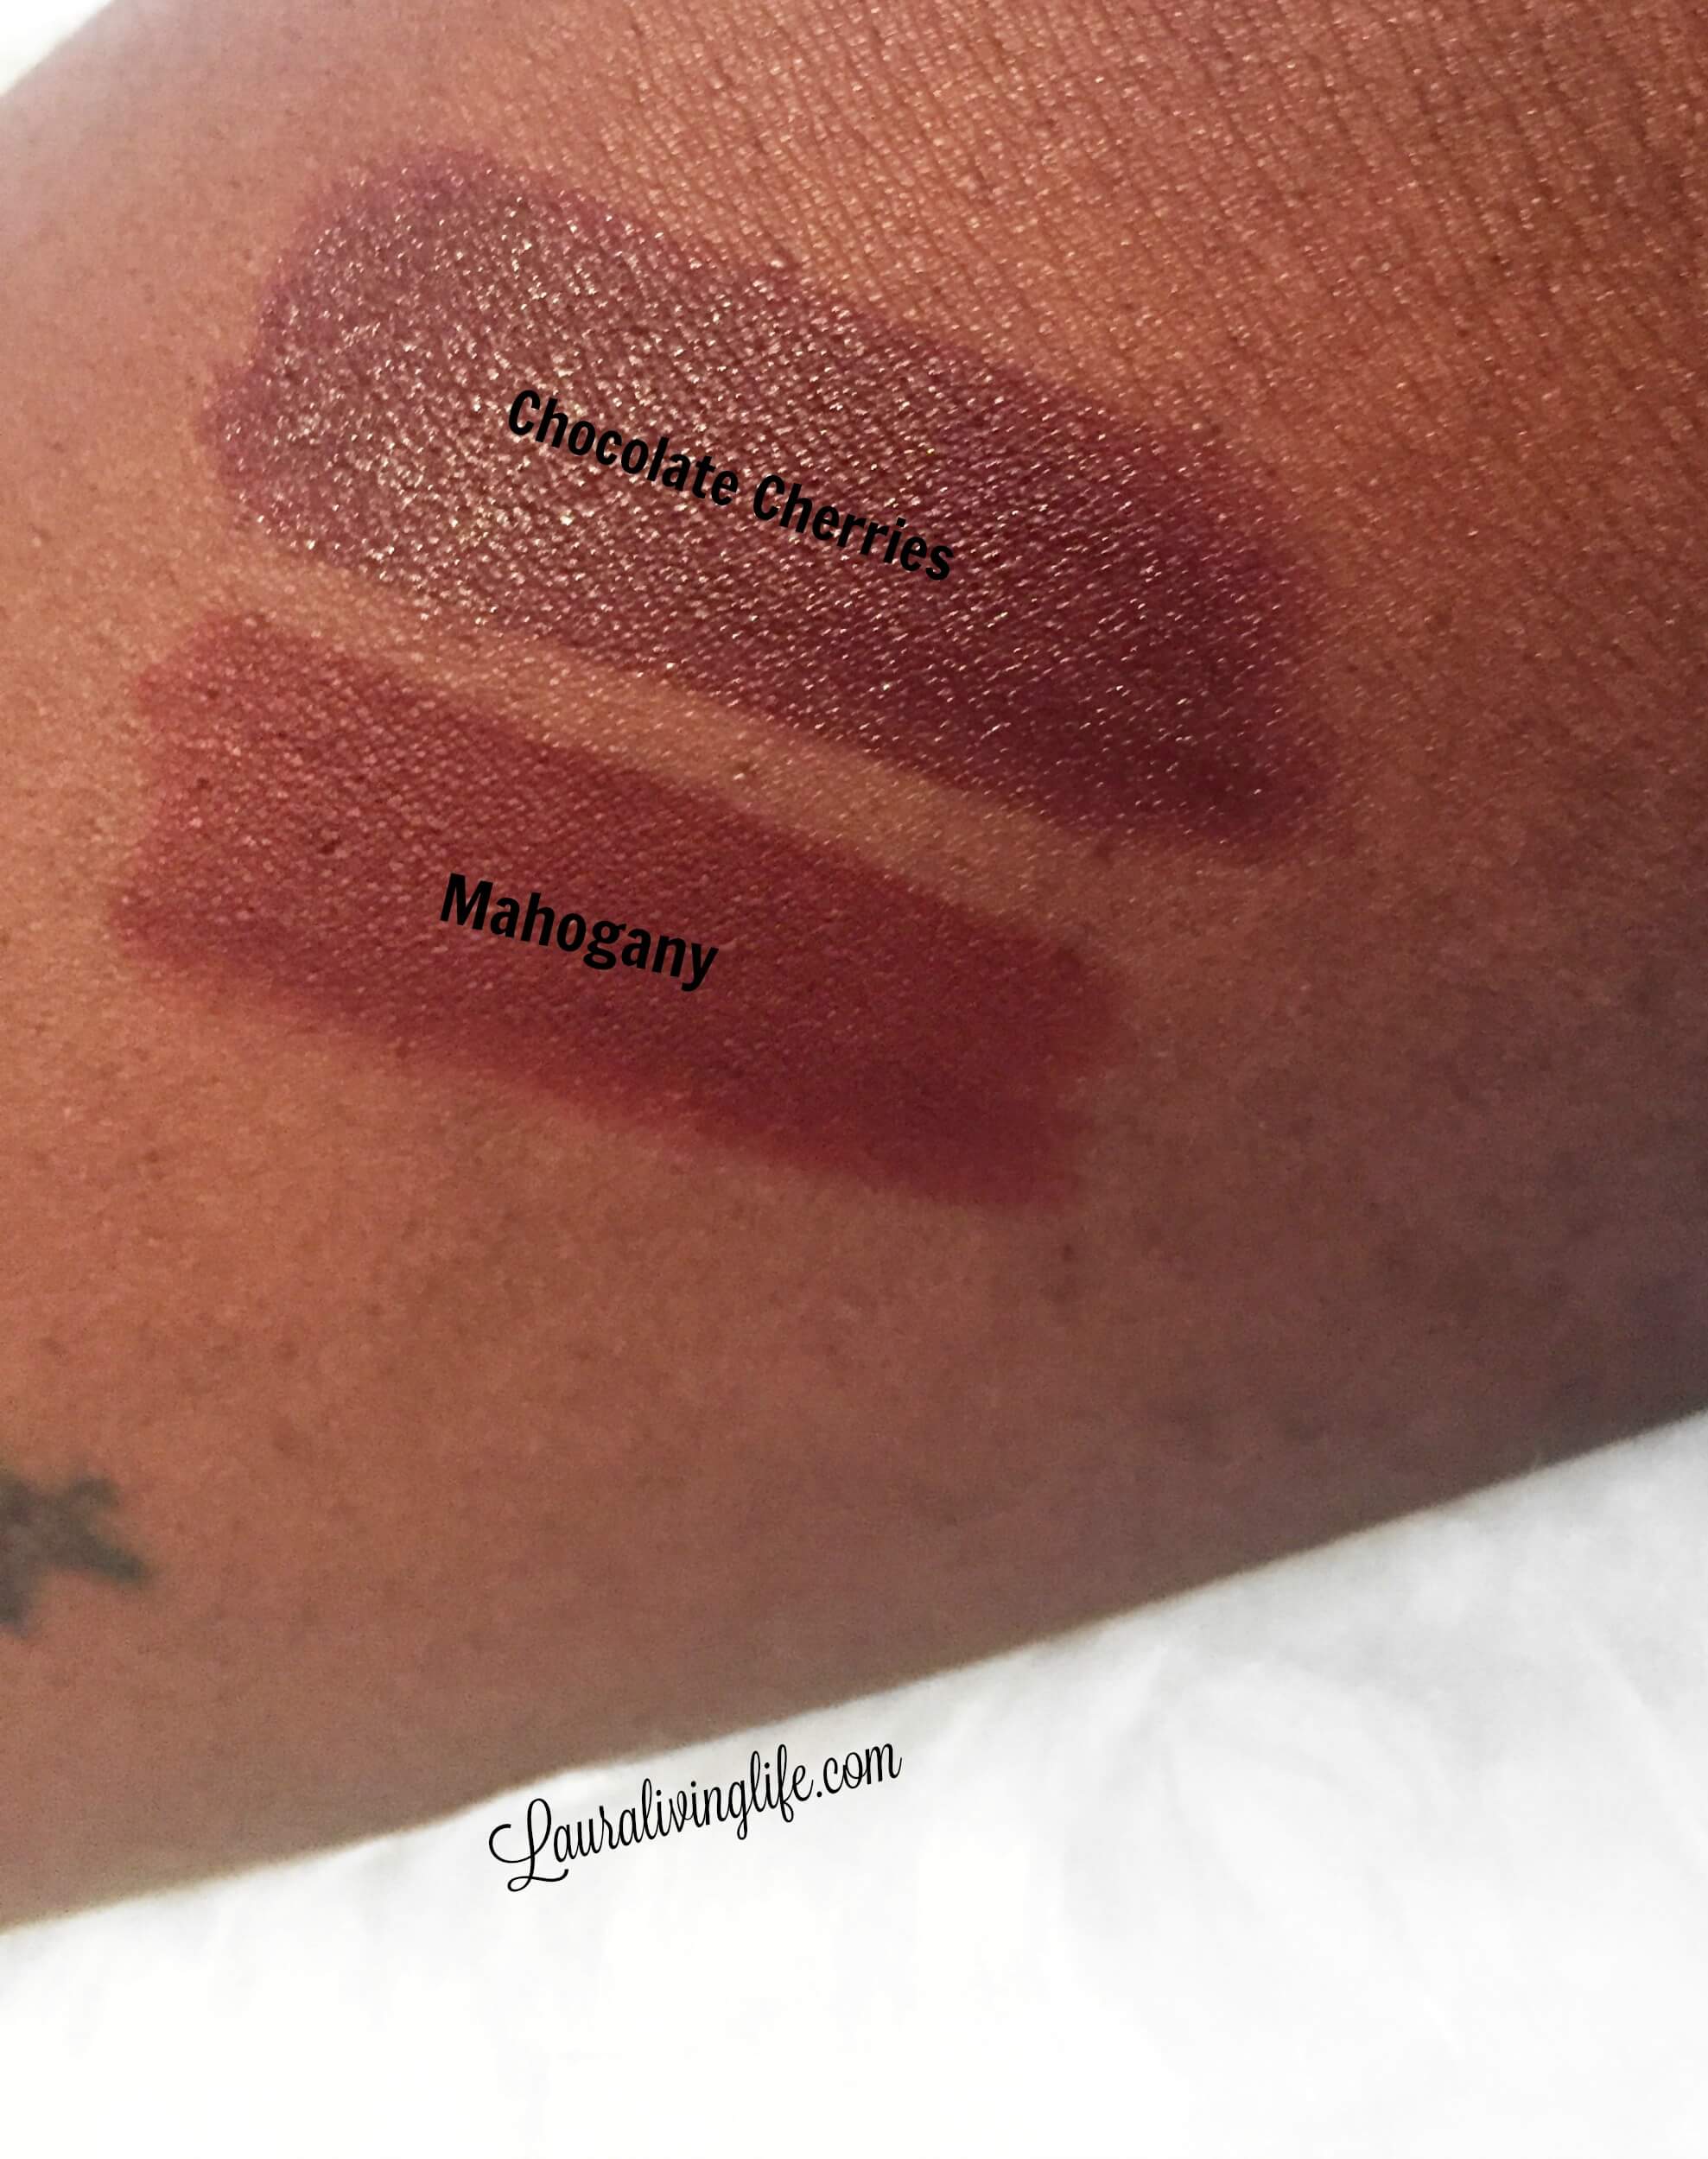 my top autumnal and winter lip combos- lauralivinglife.com